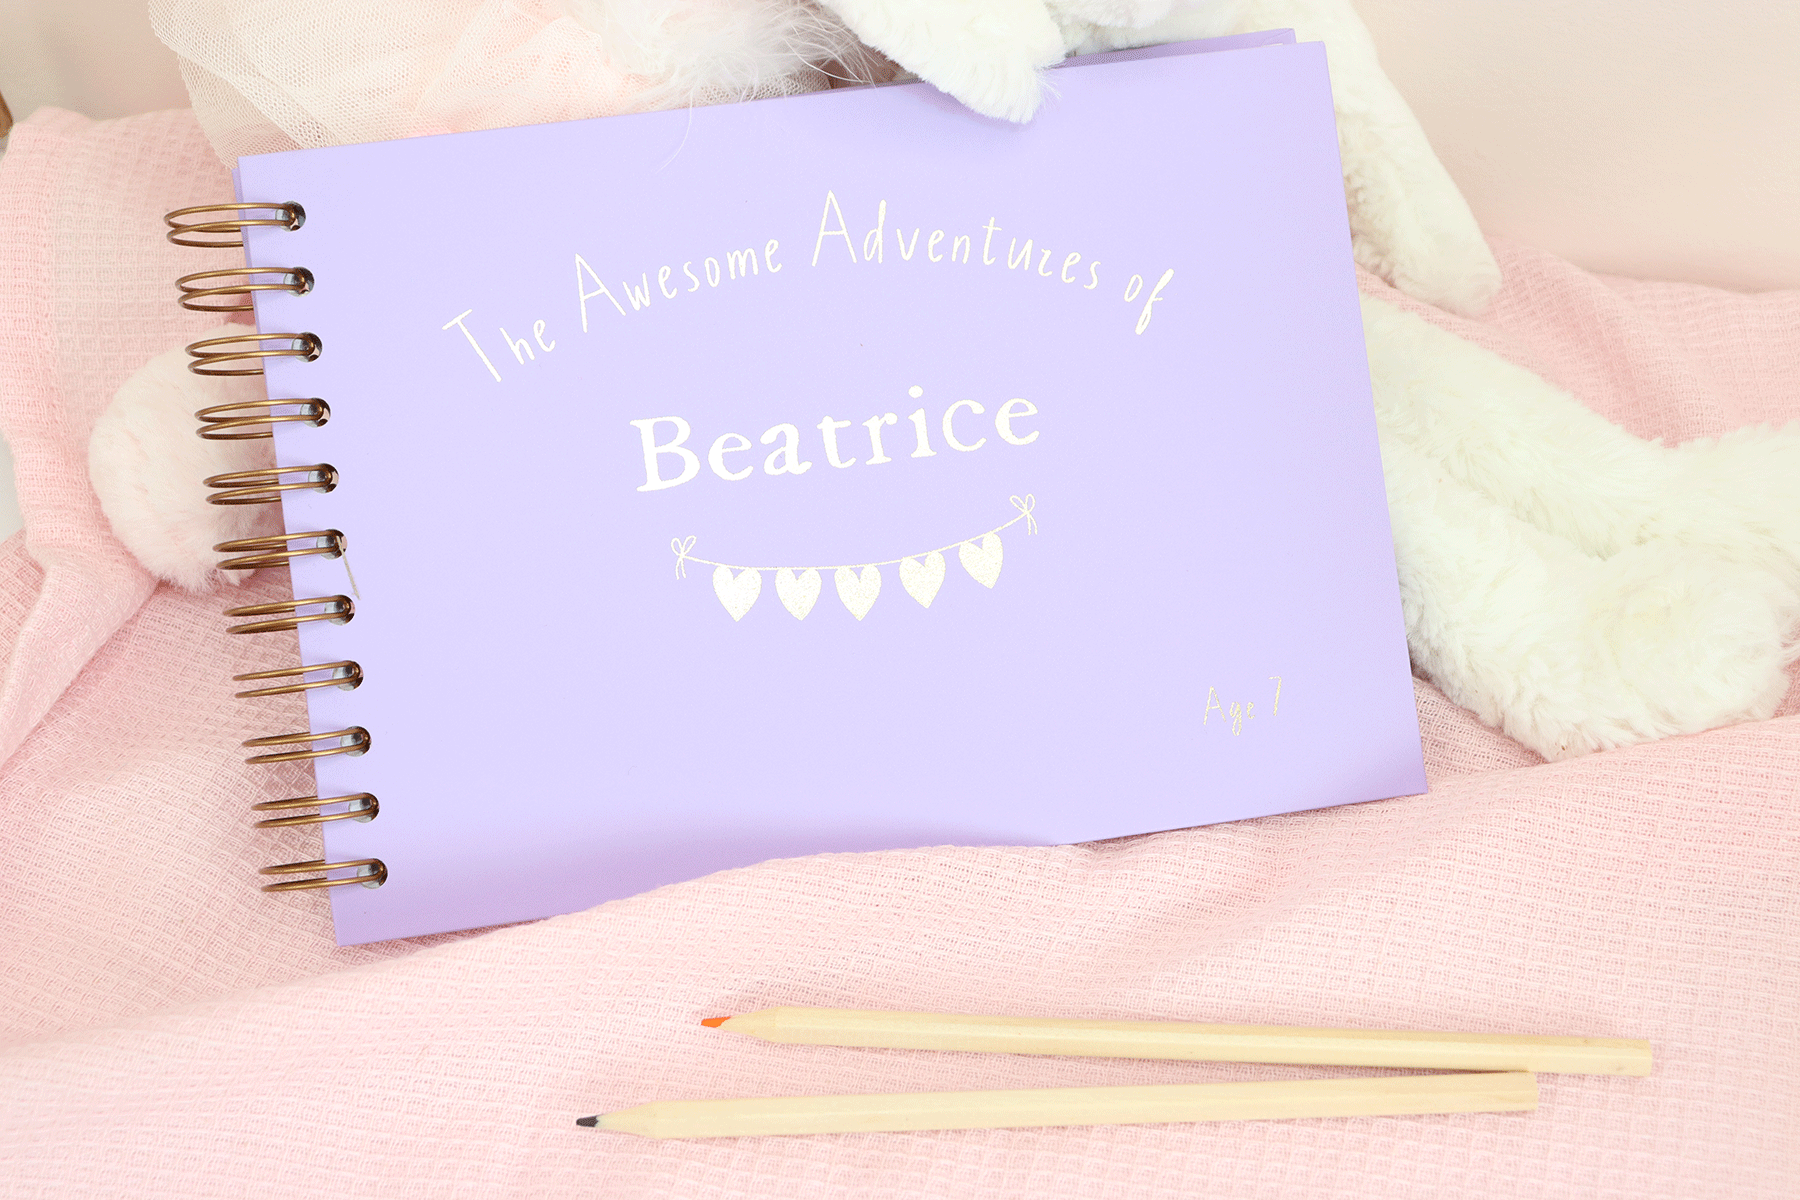 An A5 landscape lilac memory book, wire bound. The front cover reads 'the awesome adventures of Beatrice, Aged 7' in gold foiling. There are some gold love hearts on a banner